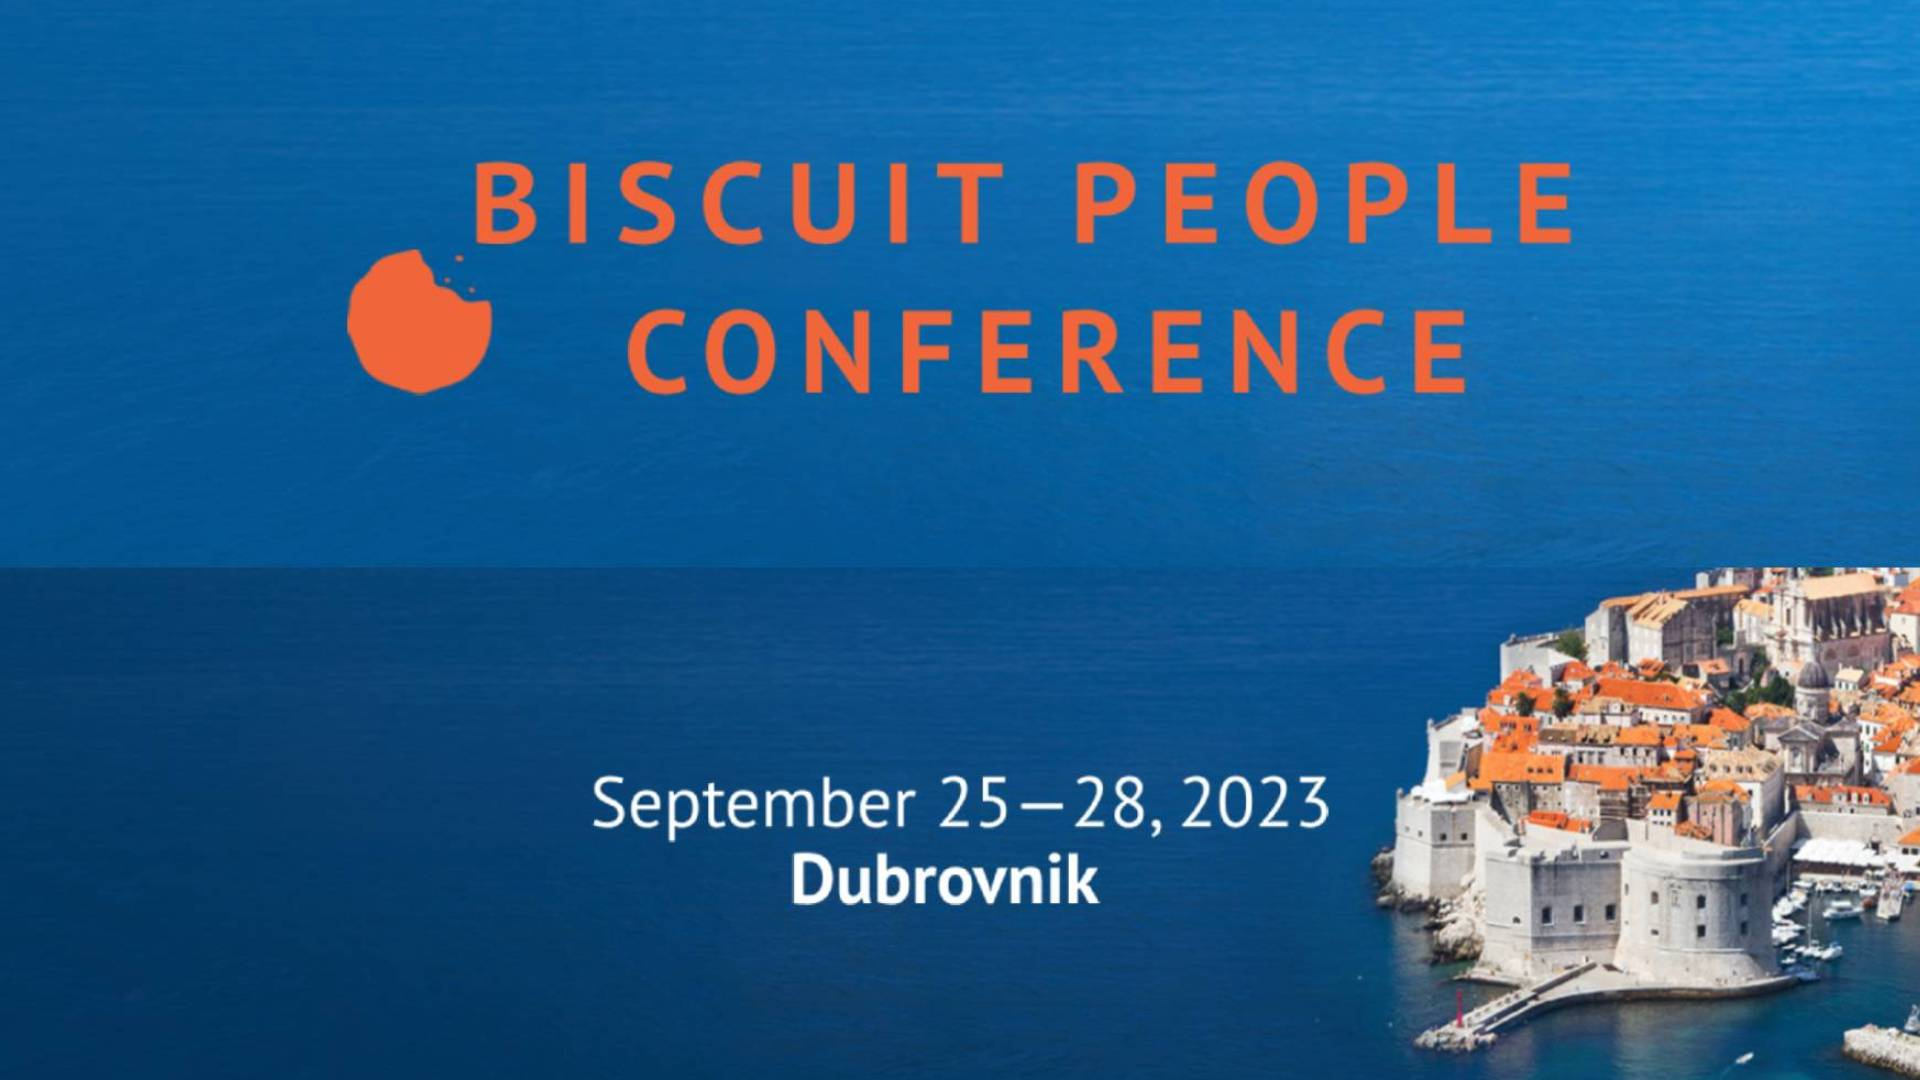 Biscuit People Conference 2023: Recap of the Remarkable Event in Dubrovnik